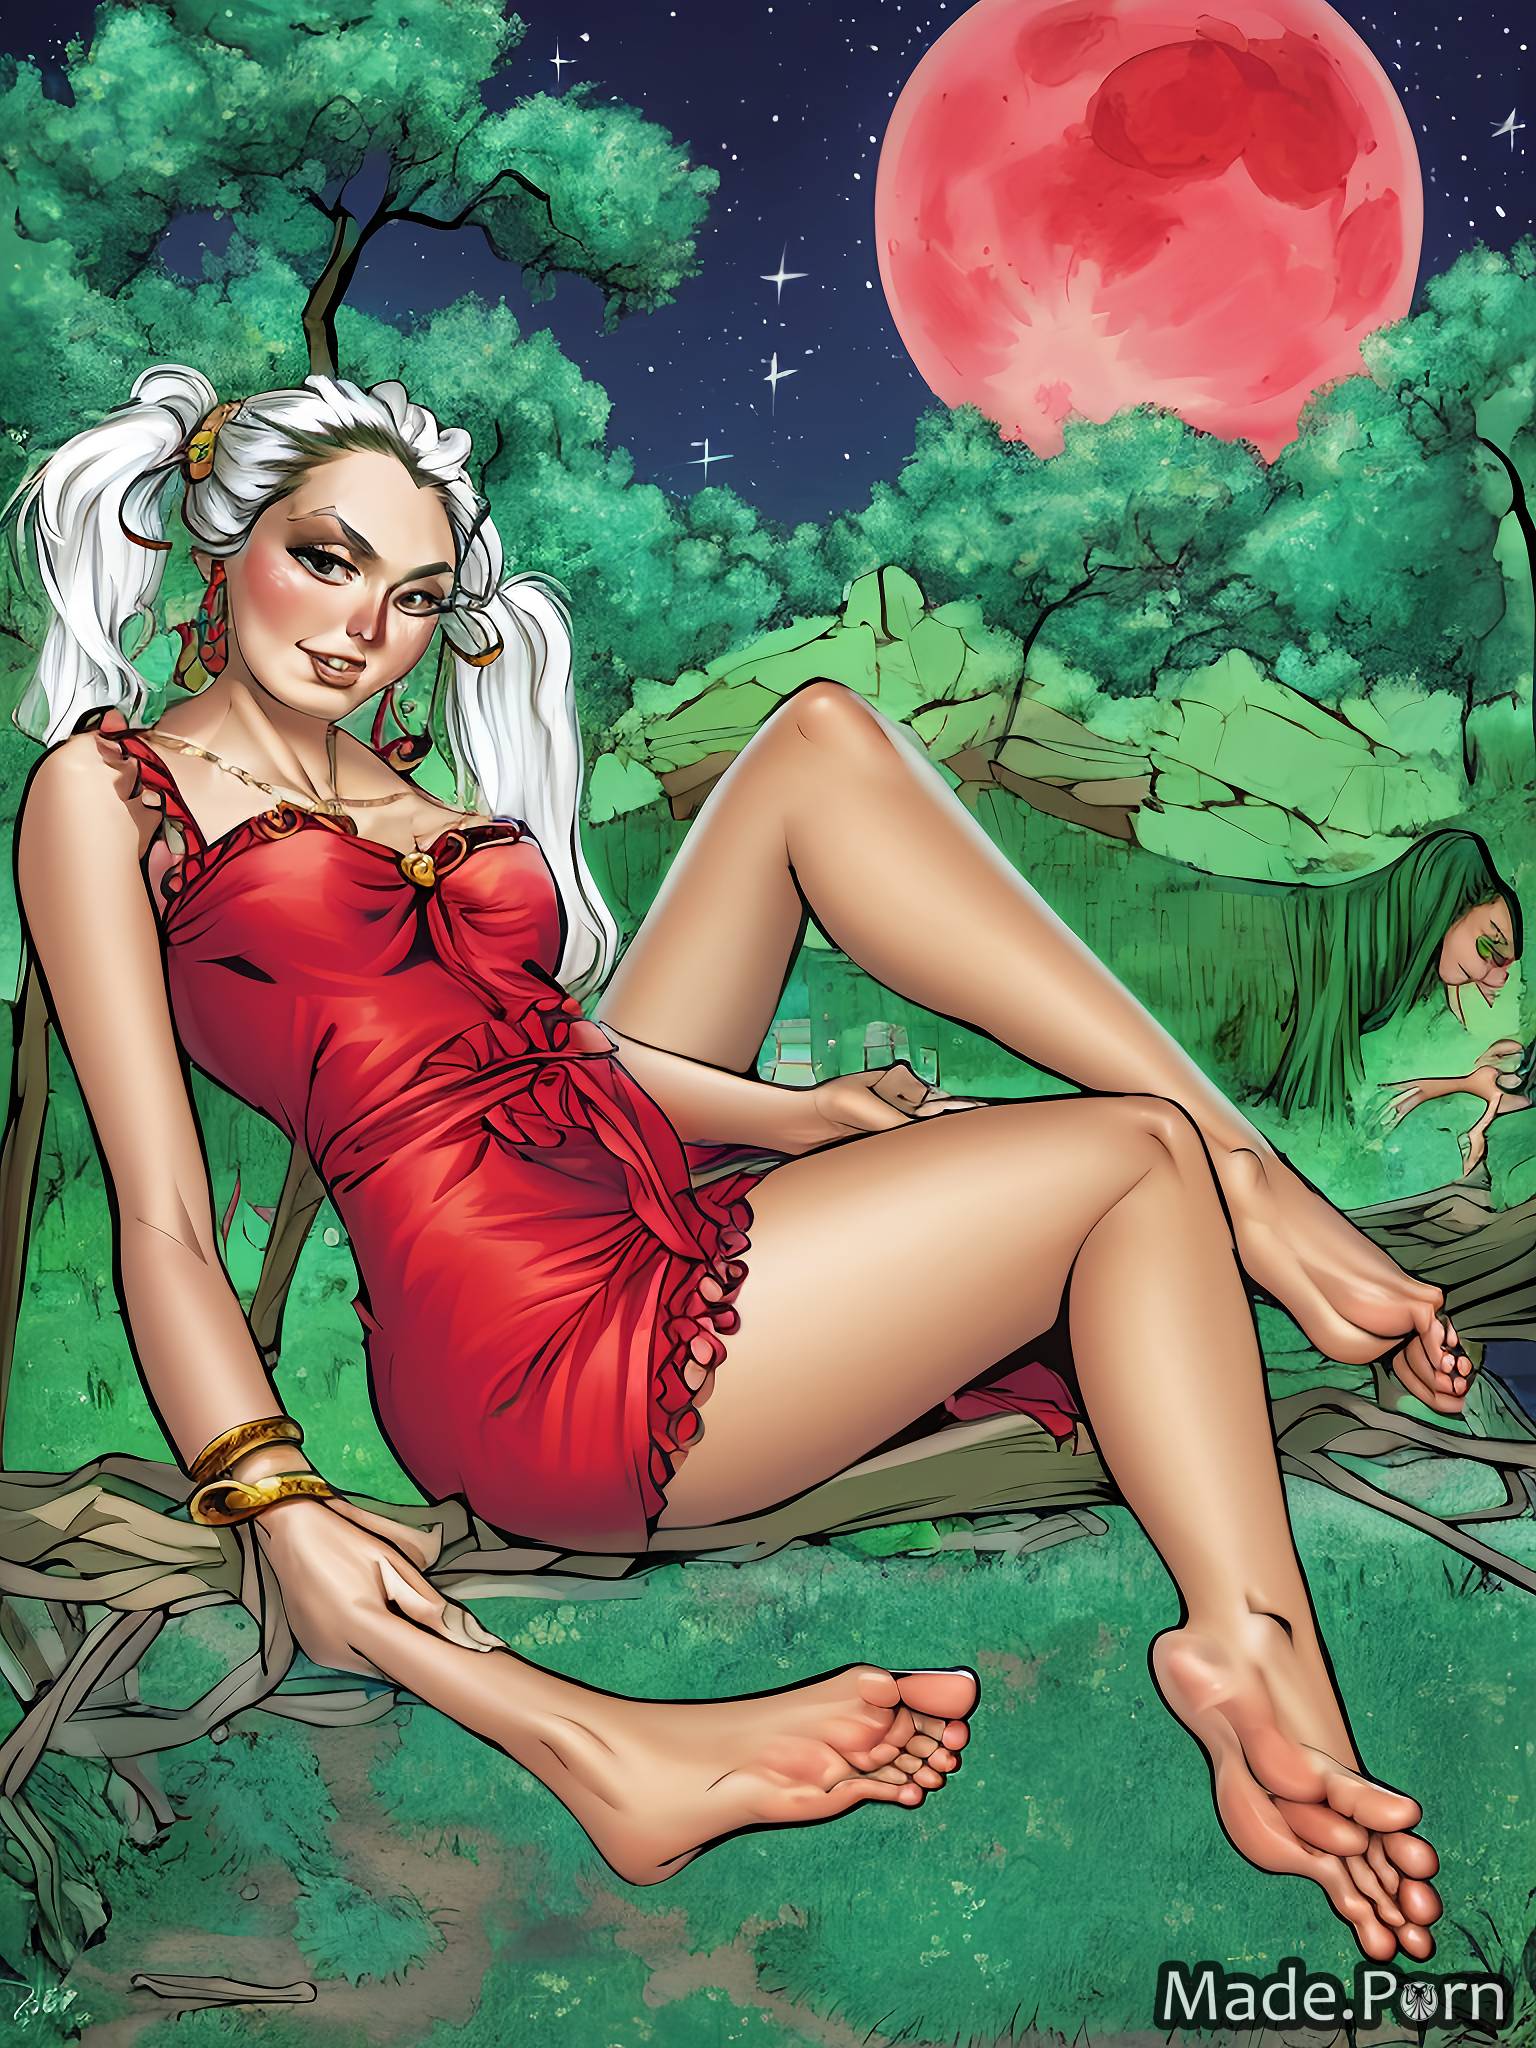 lunar eclipse navy white hair persian ruby comic negligee